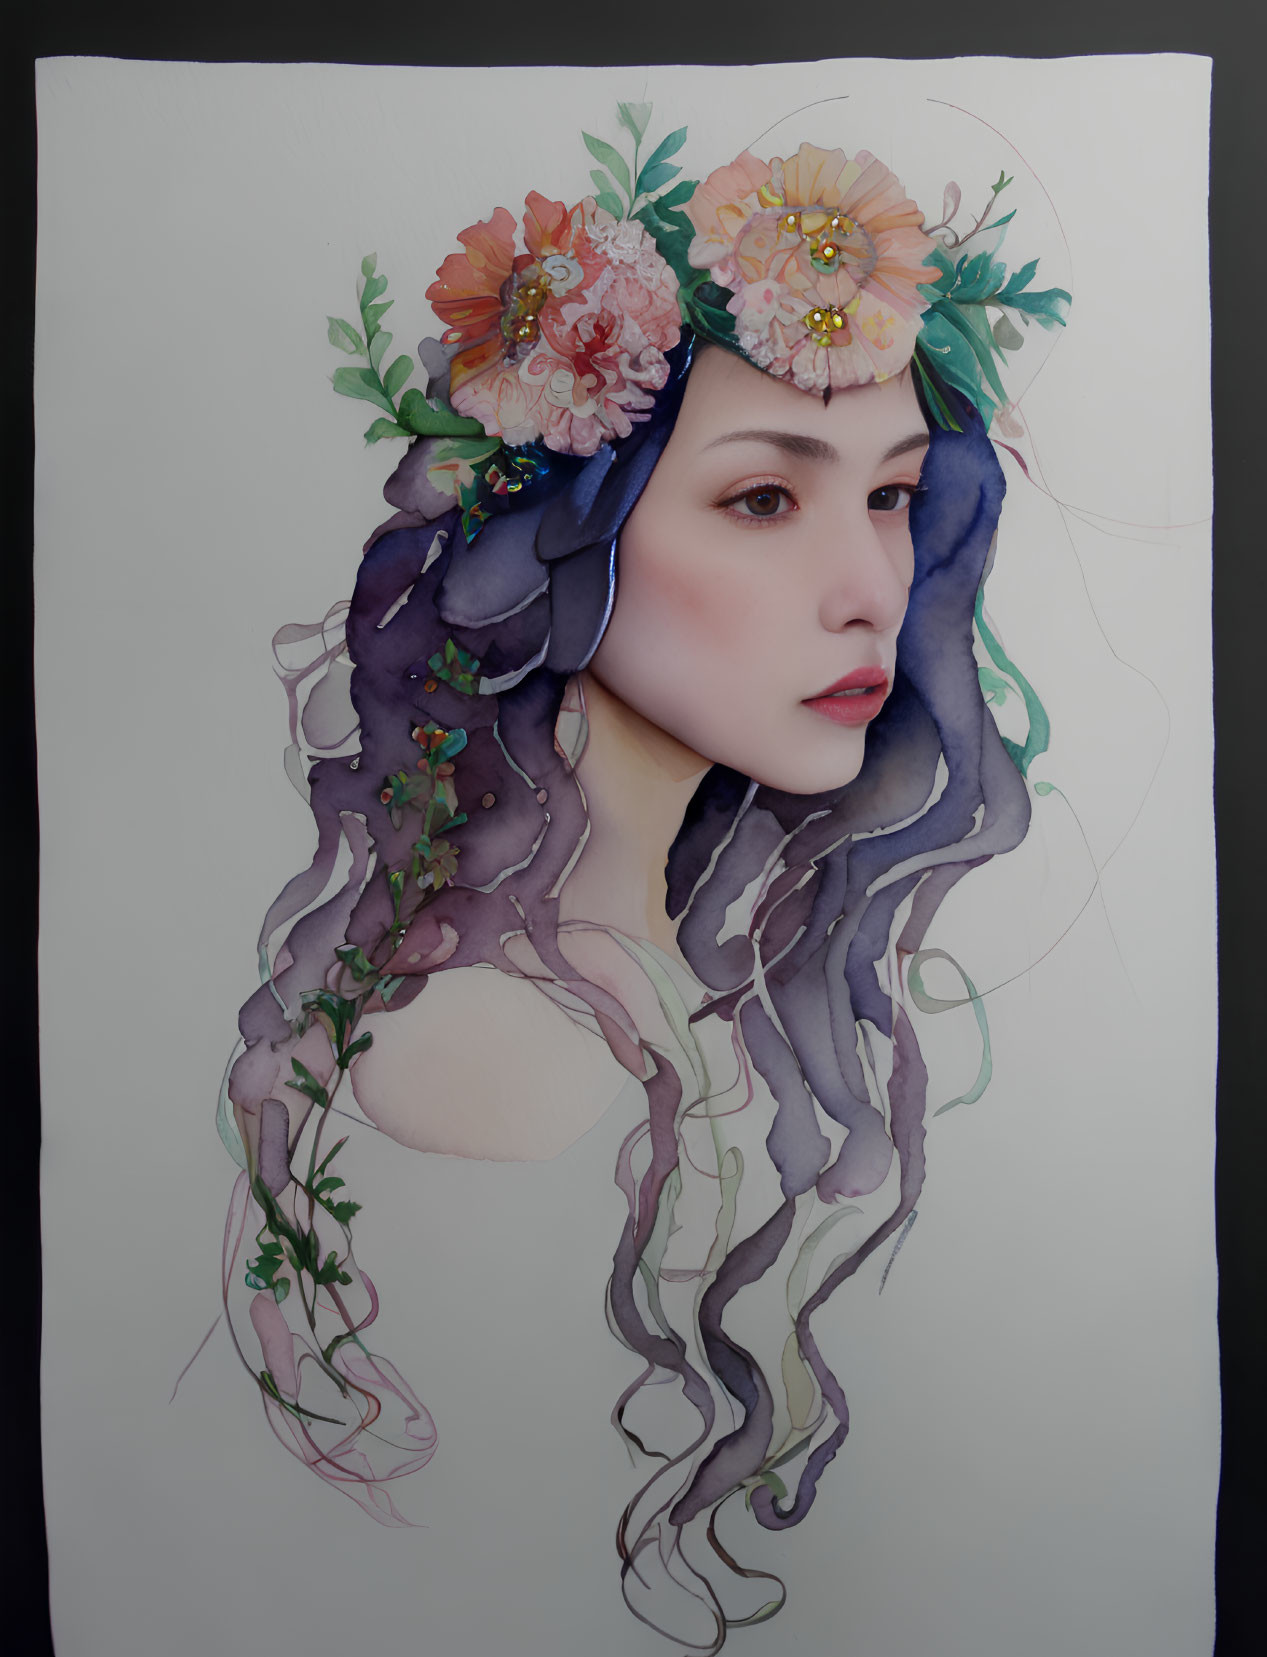 Detailed illustration of woman with floral hair accents in soft pastels and vibrant hues